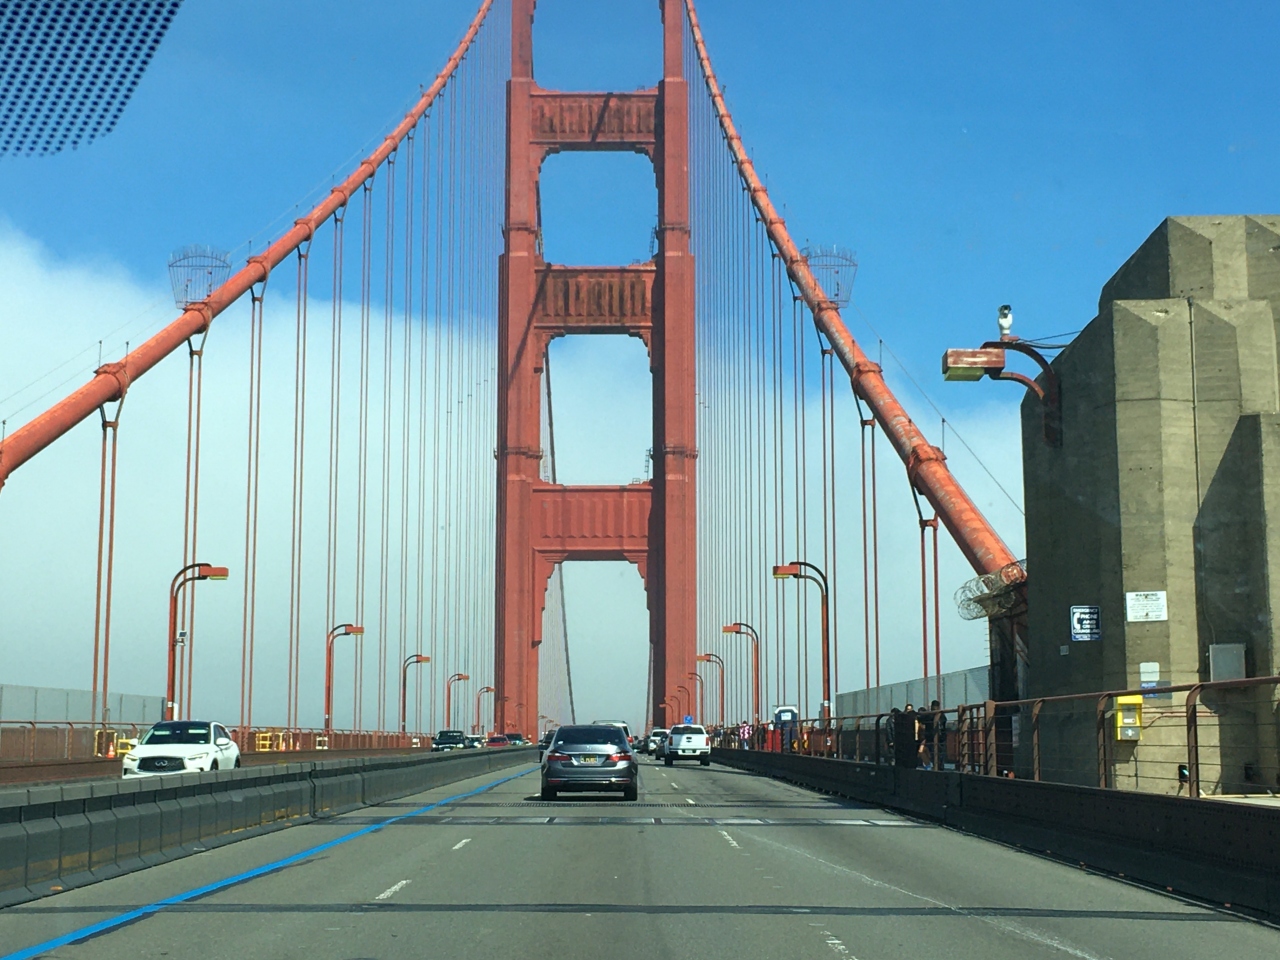 Crossing the Golden Gate Bridge to get to Muir Woods outside San Francisco